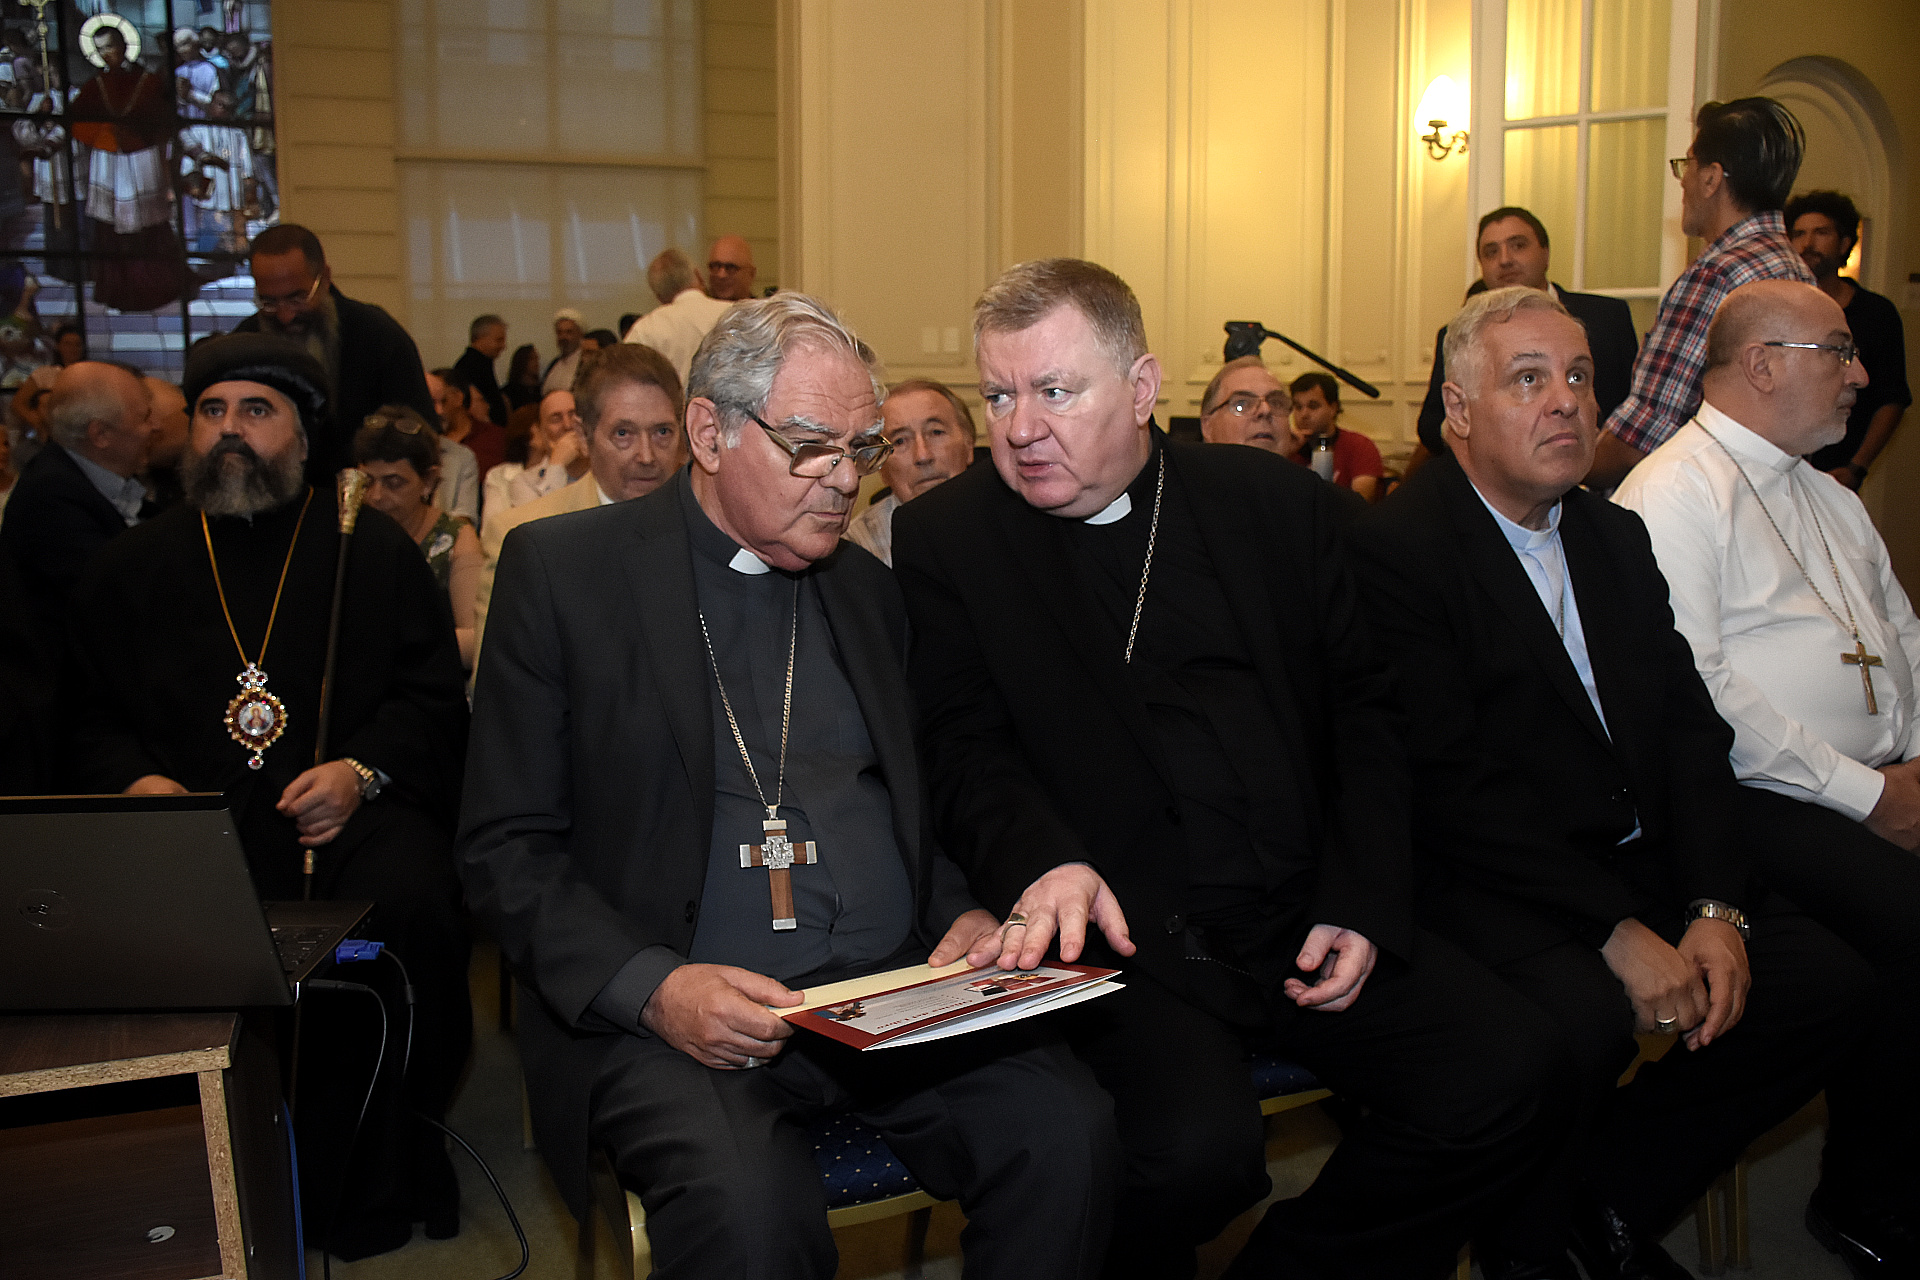 The president of the Argentine Episcopal Conference, Monsignor Oscar Ojea, together with the Apostolic Nuncio in Argentina, Monsignor Adamczyk Morslav.  To his left Marcelo Colombo, Archbishop of Mendoza and first vice president of the Argentine Episcopal Conference, and the Archbishop of Bahía Blanca, Fray Carlos Azpiroz Costa, second vice president (Photos: Nicolás Stulberg)